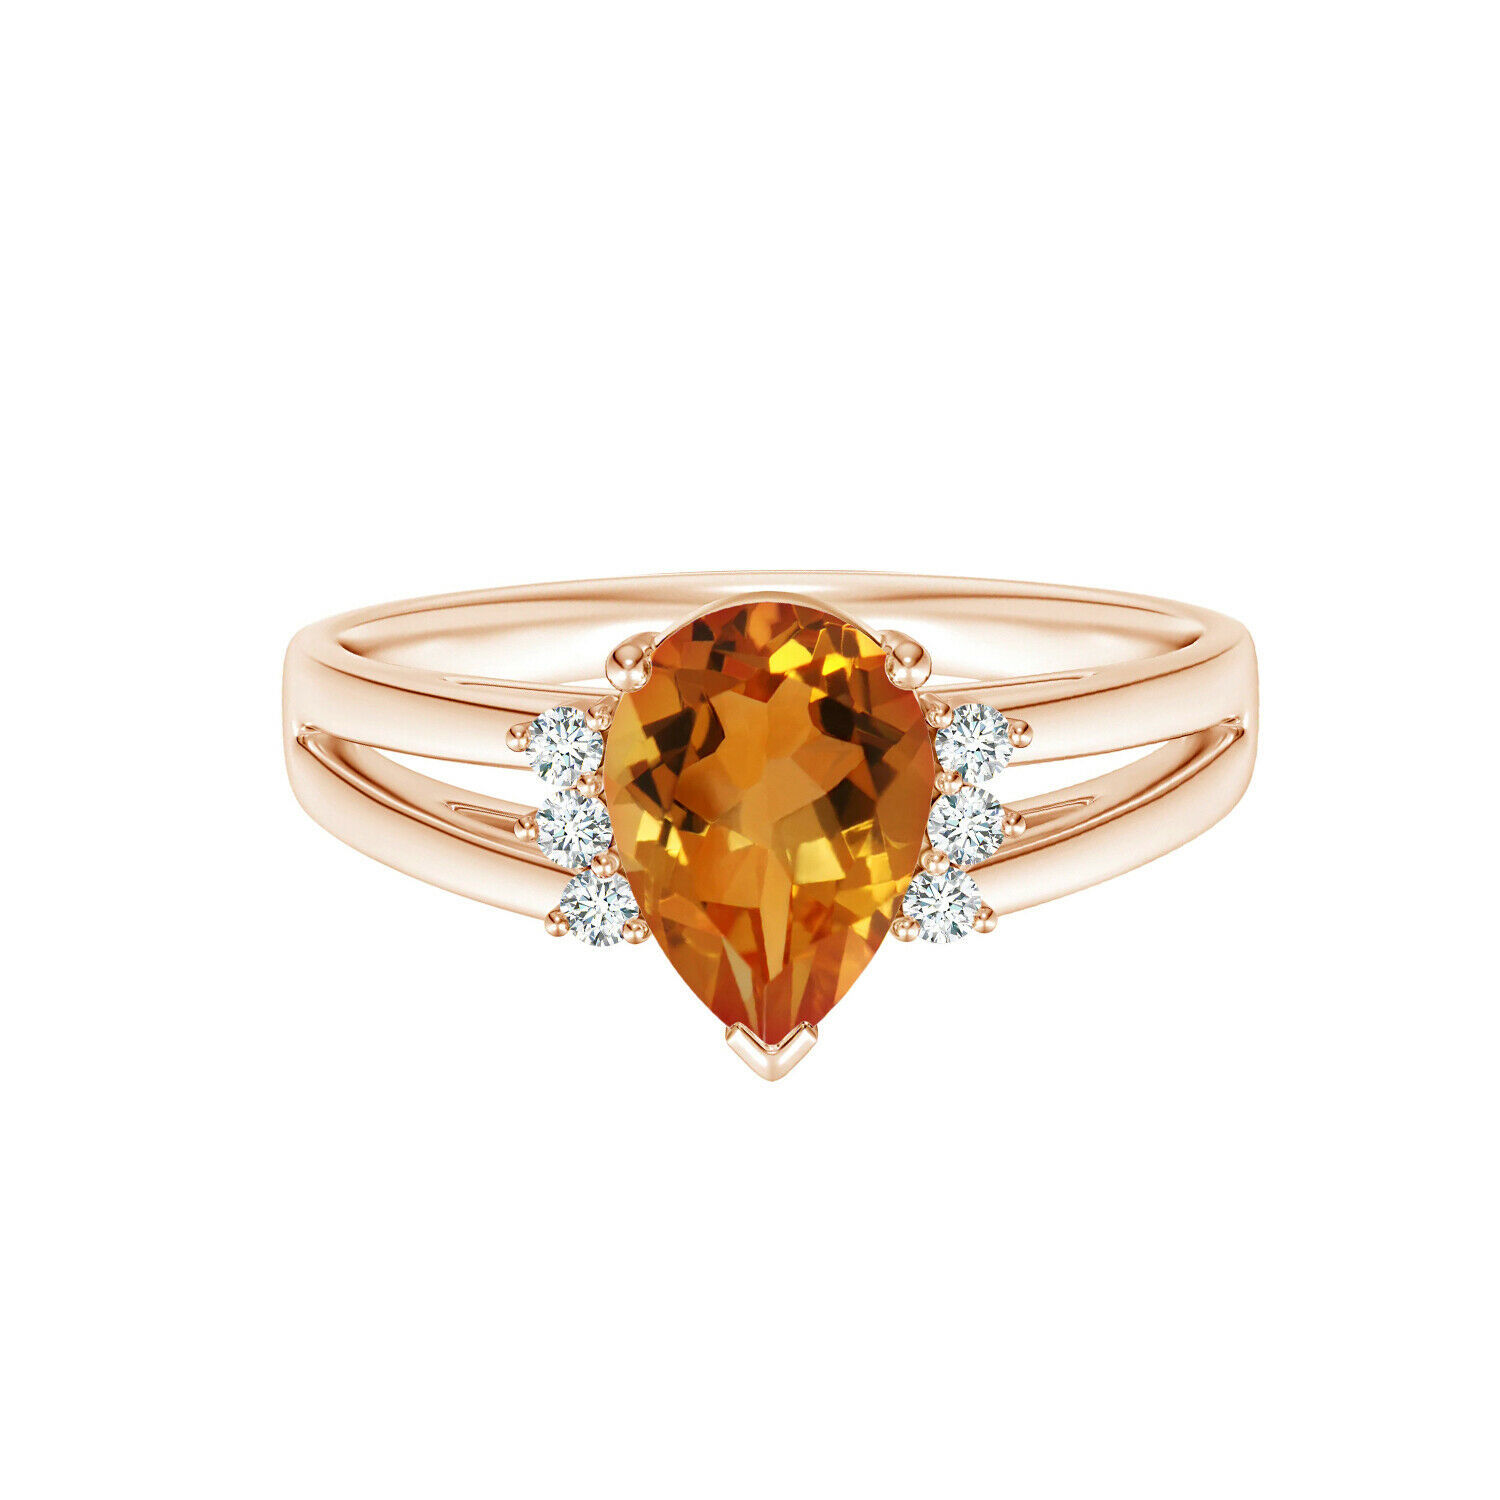 Kimaya Jewel - 0.75 cts pear shaped citrine 9k rose gold triple solitaire accents ring